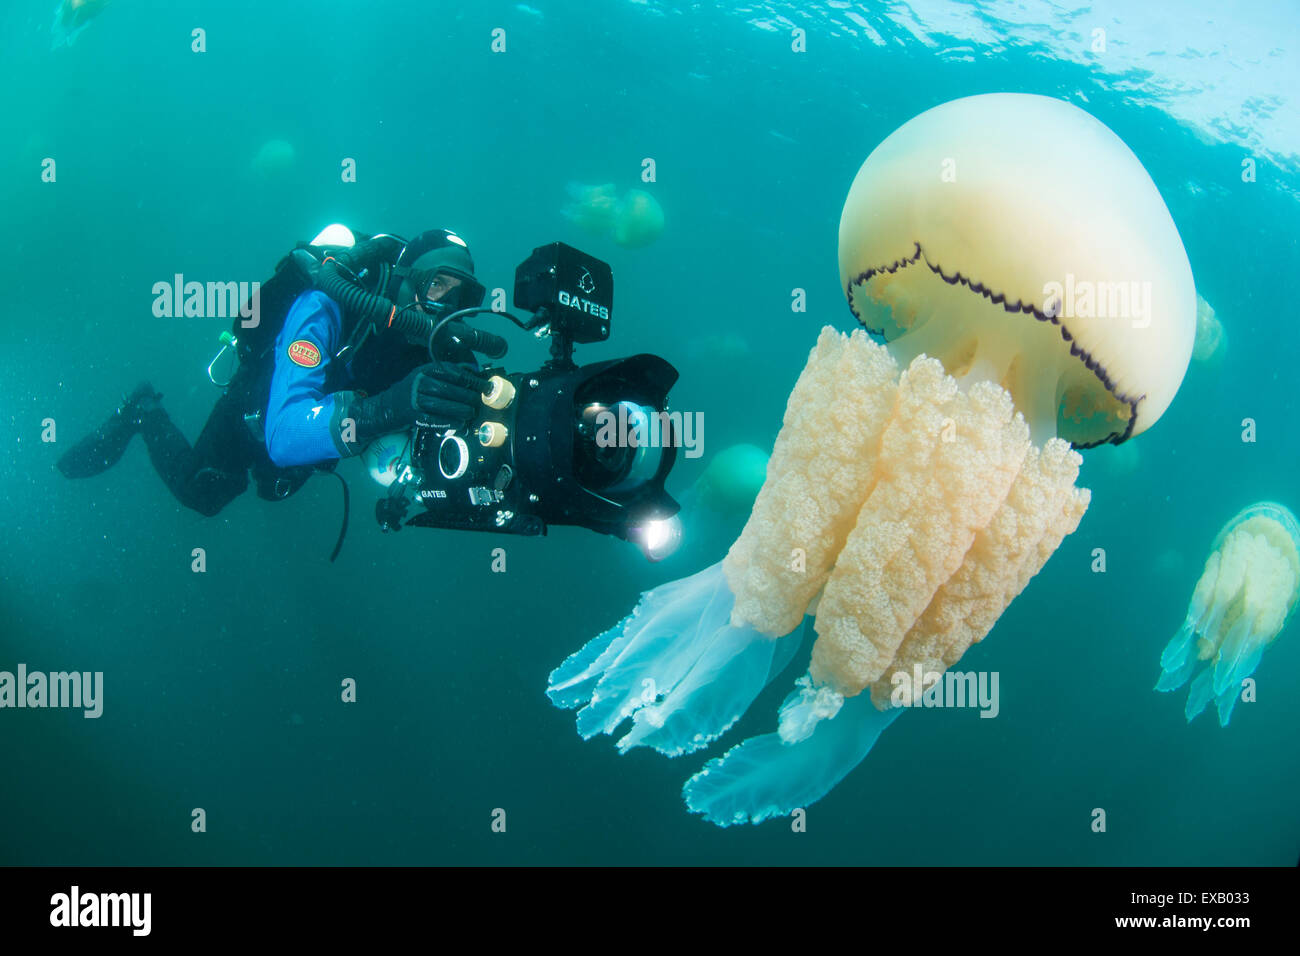 Barrel Jelly fish with diver of the coat of Devon UK. Stock Photo